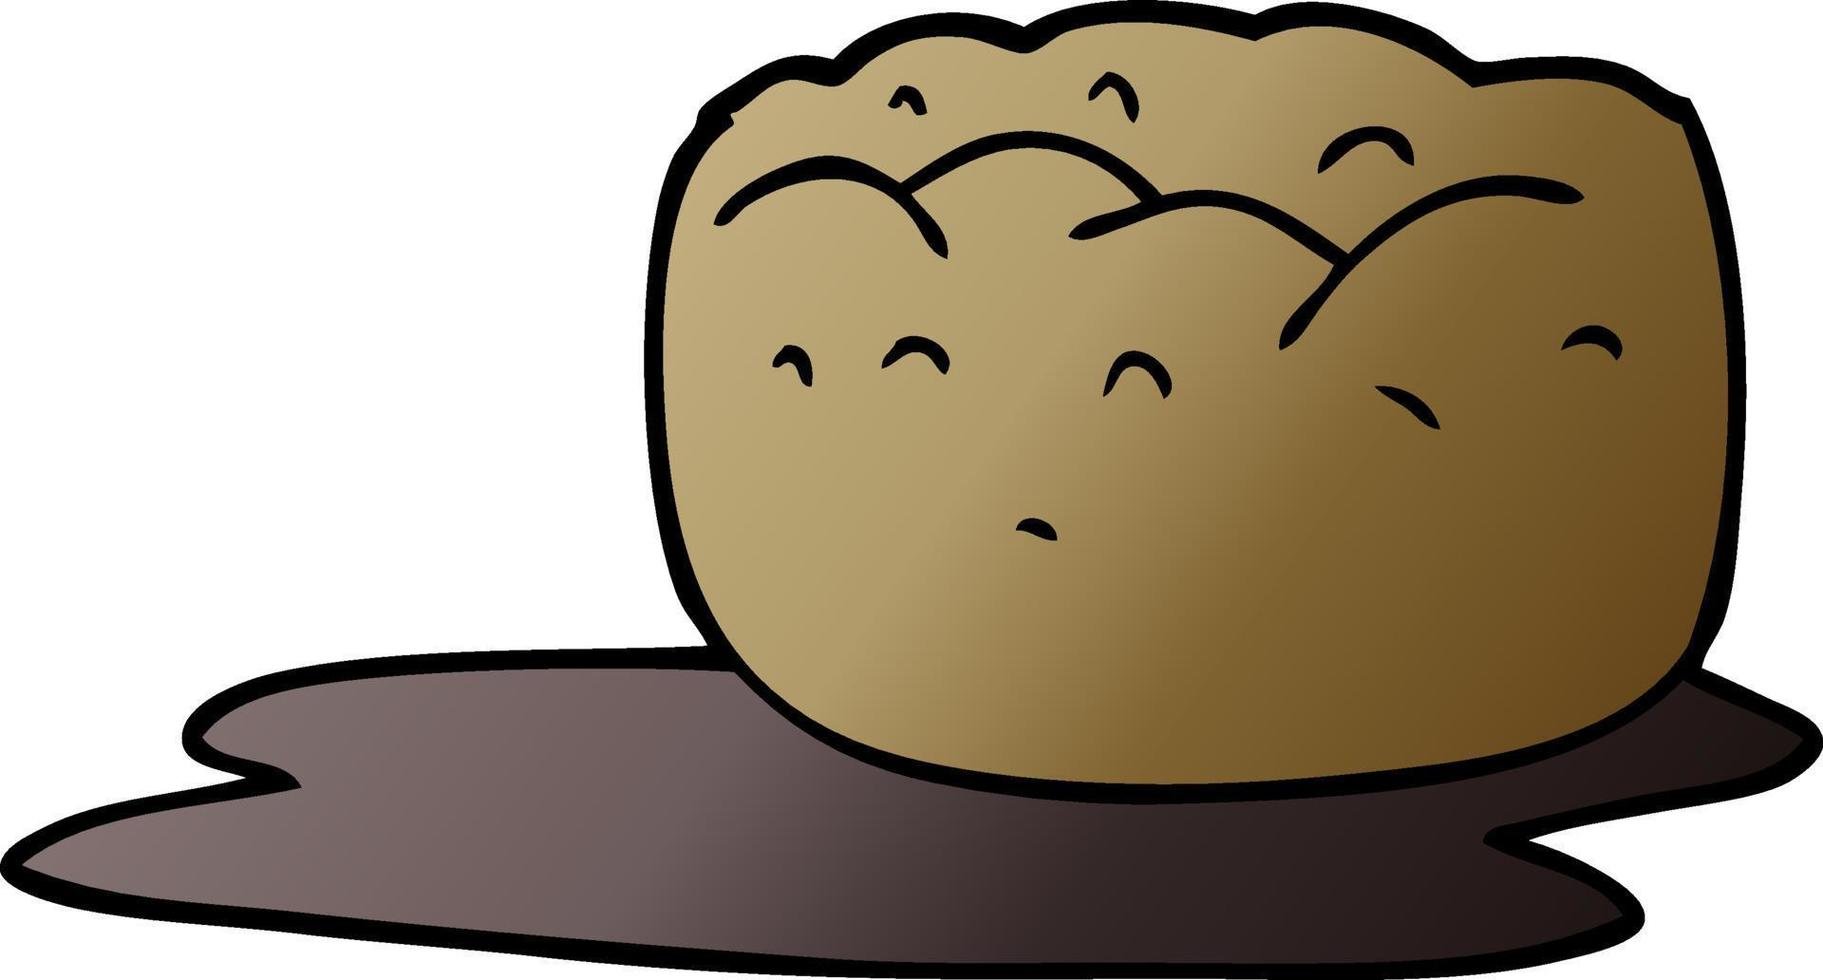 cartoon doodle yorkshire pudding and gravy vector